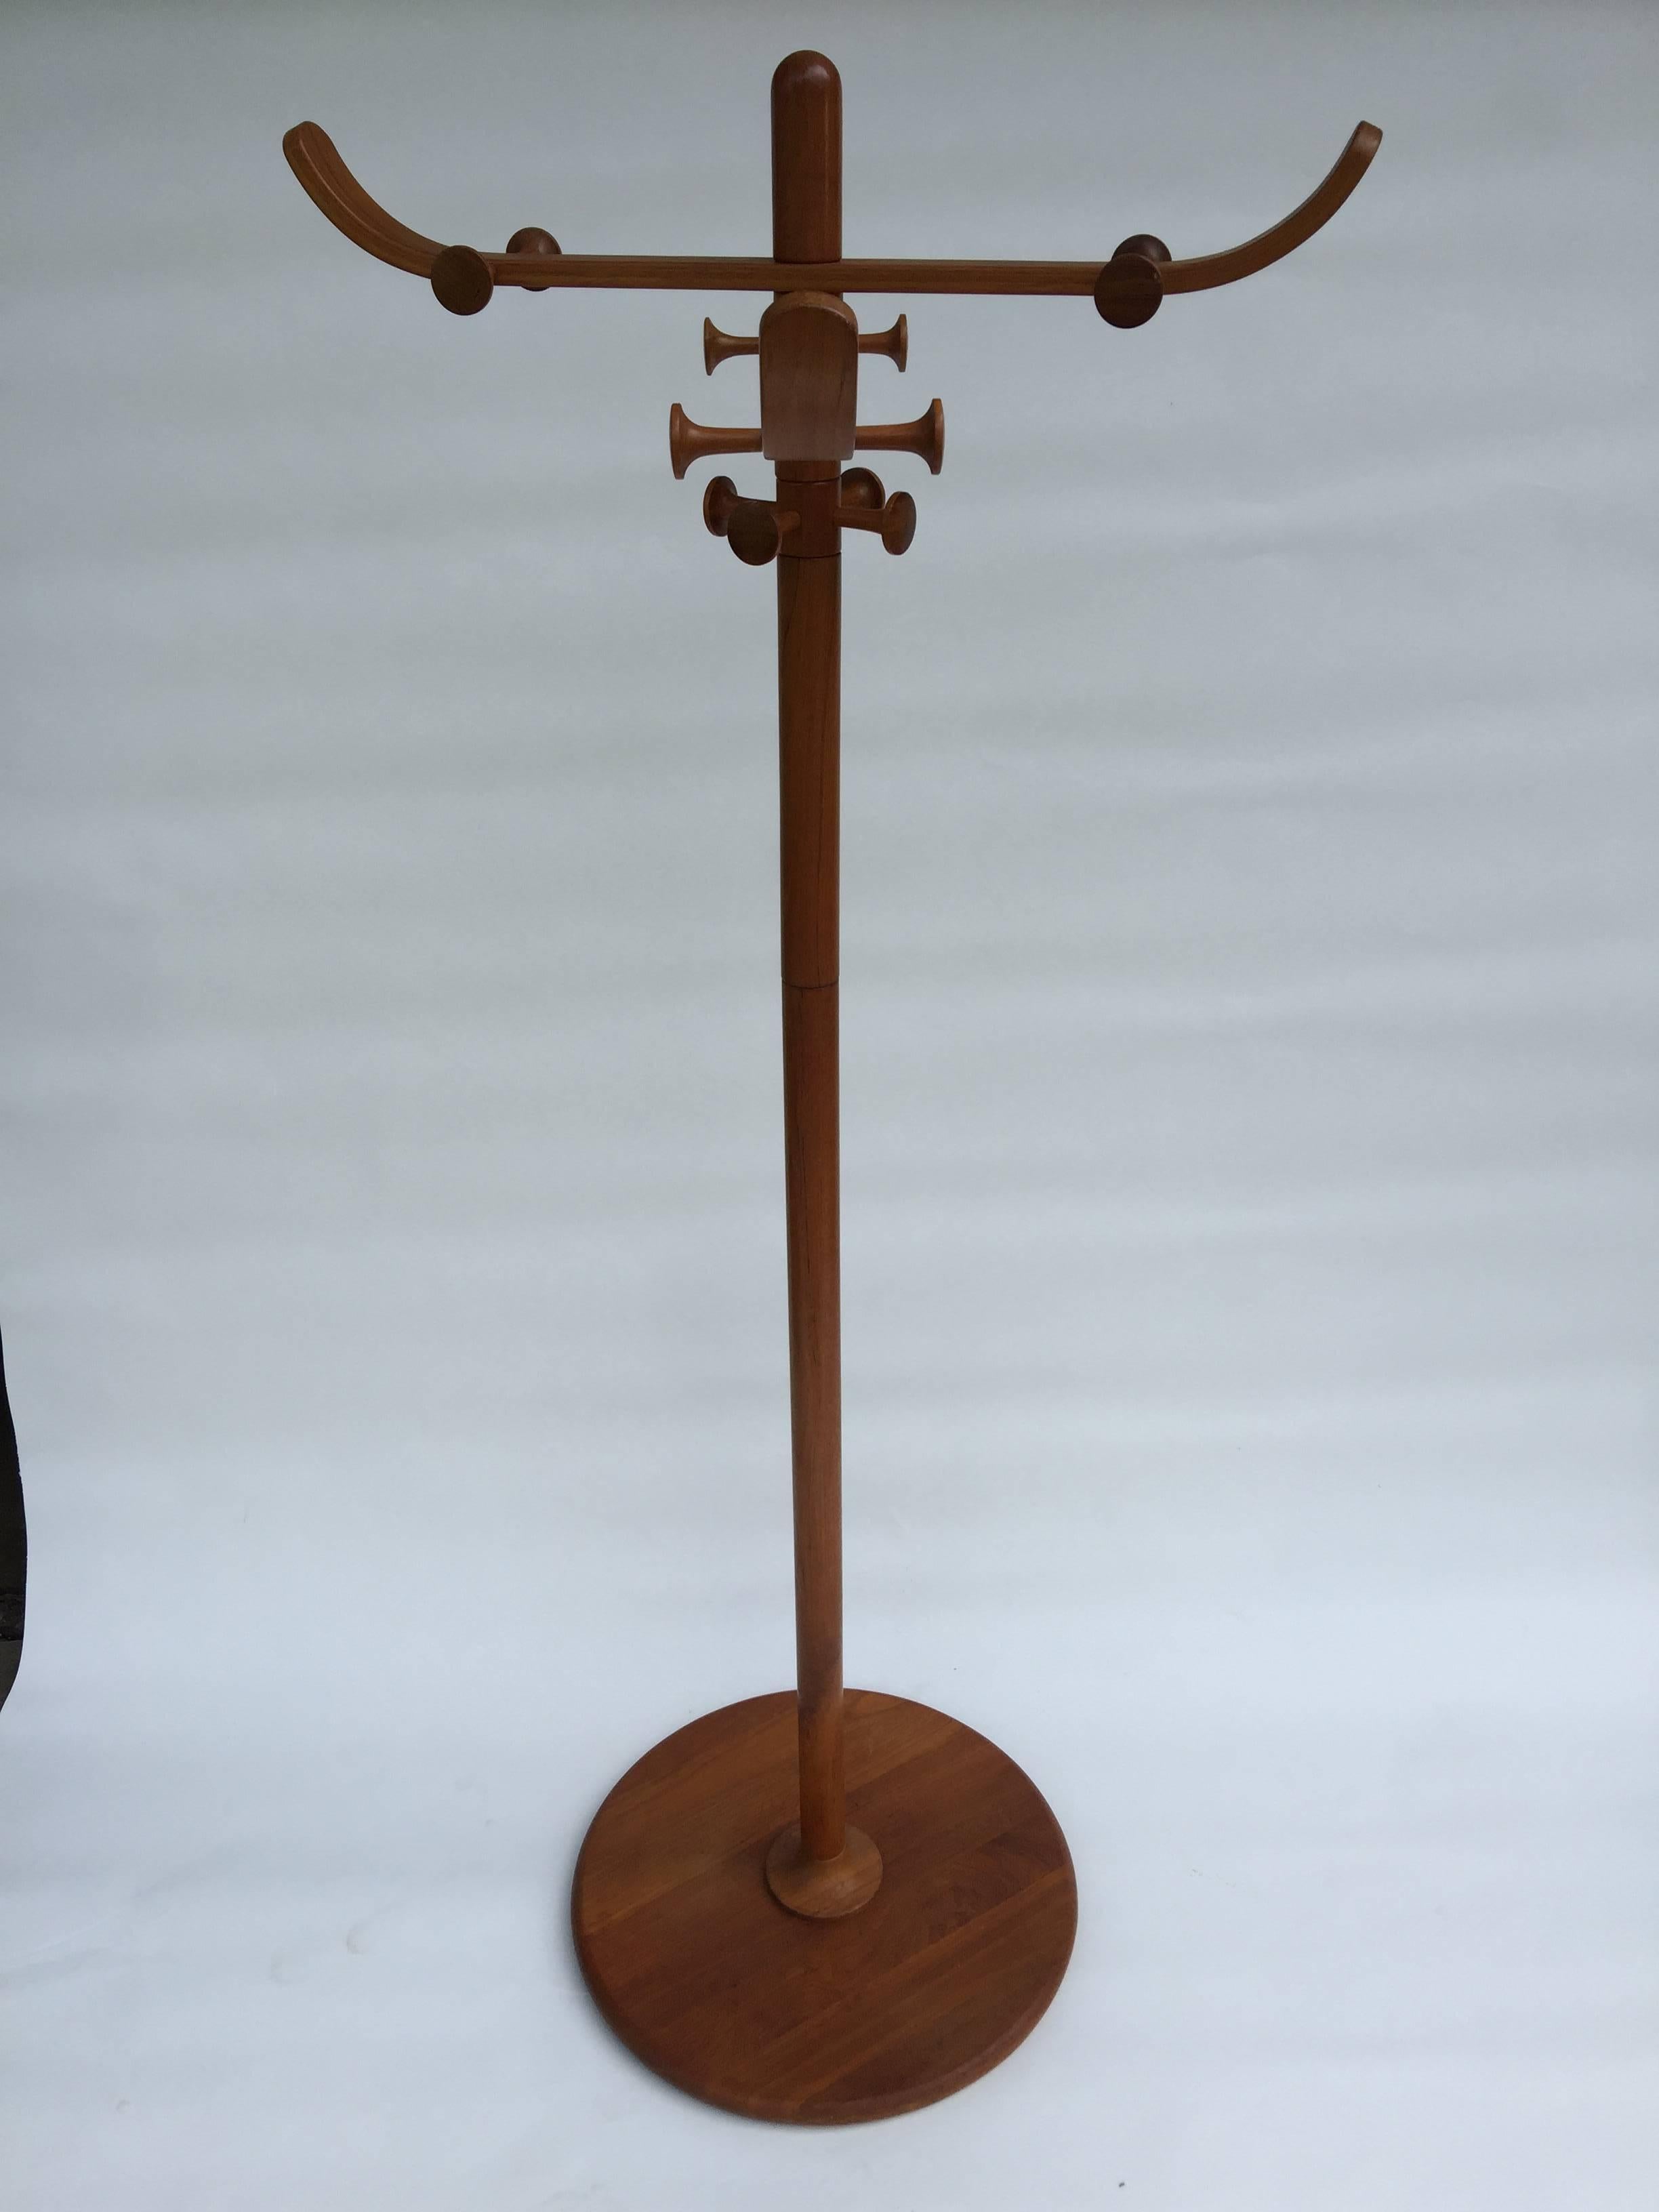 Beautiful and useful teak coat rack with rotating hooks. A round base supports the upright pole and bentwood arms and hooks for hanging coats hats umbrellas and more. Beautifully designed and crafted would make a great addition to any entryway or